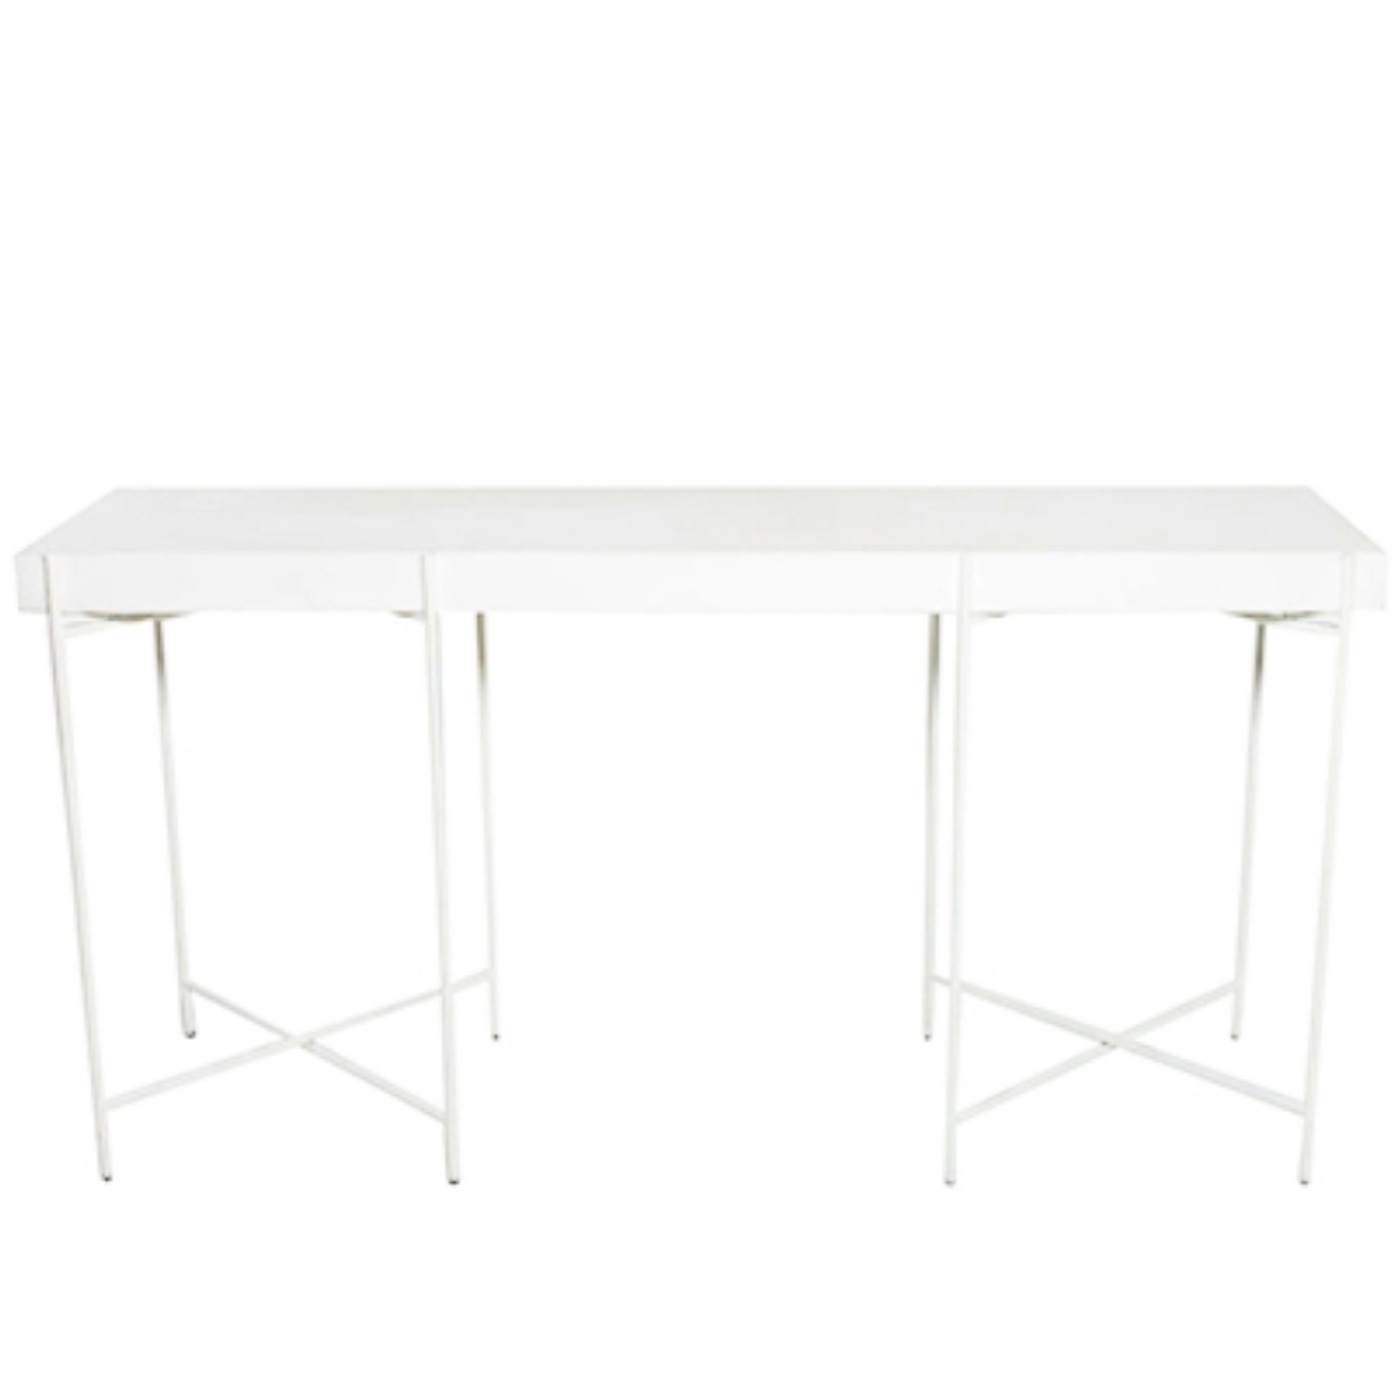 Rectangular Cocktail Table With White Top And White Steel Crossed Legs For Hire.